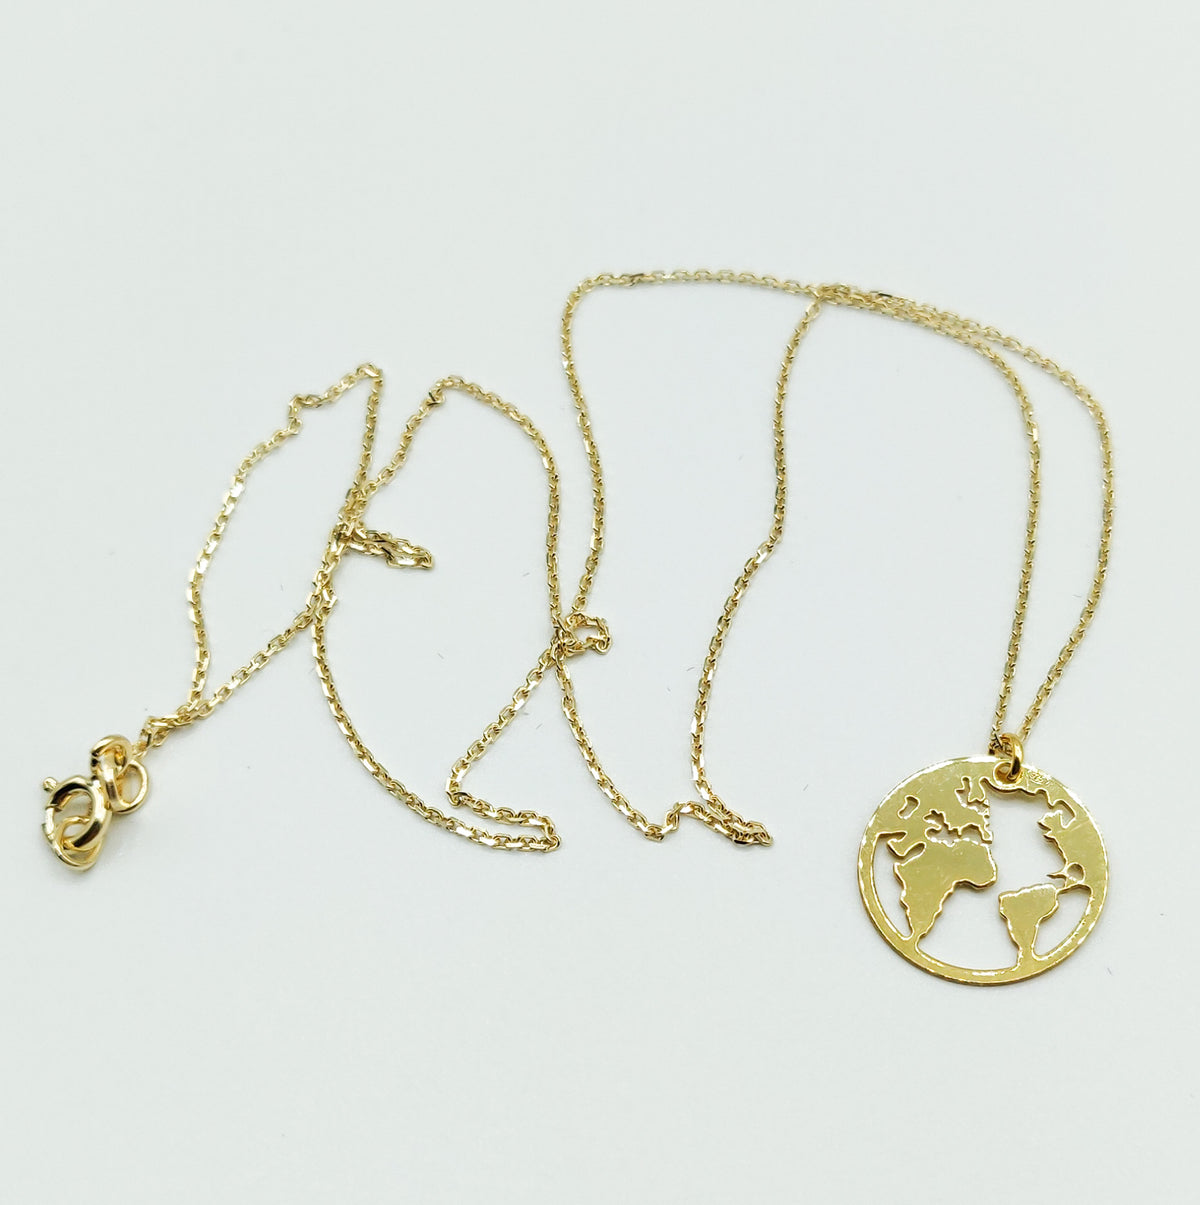 World gold necklace - sterling silver 925